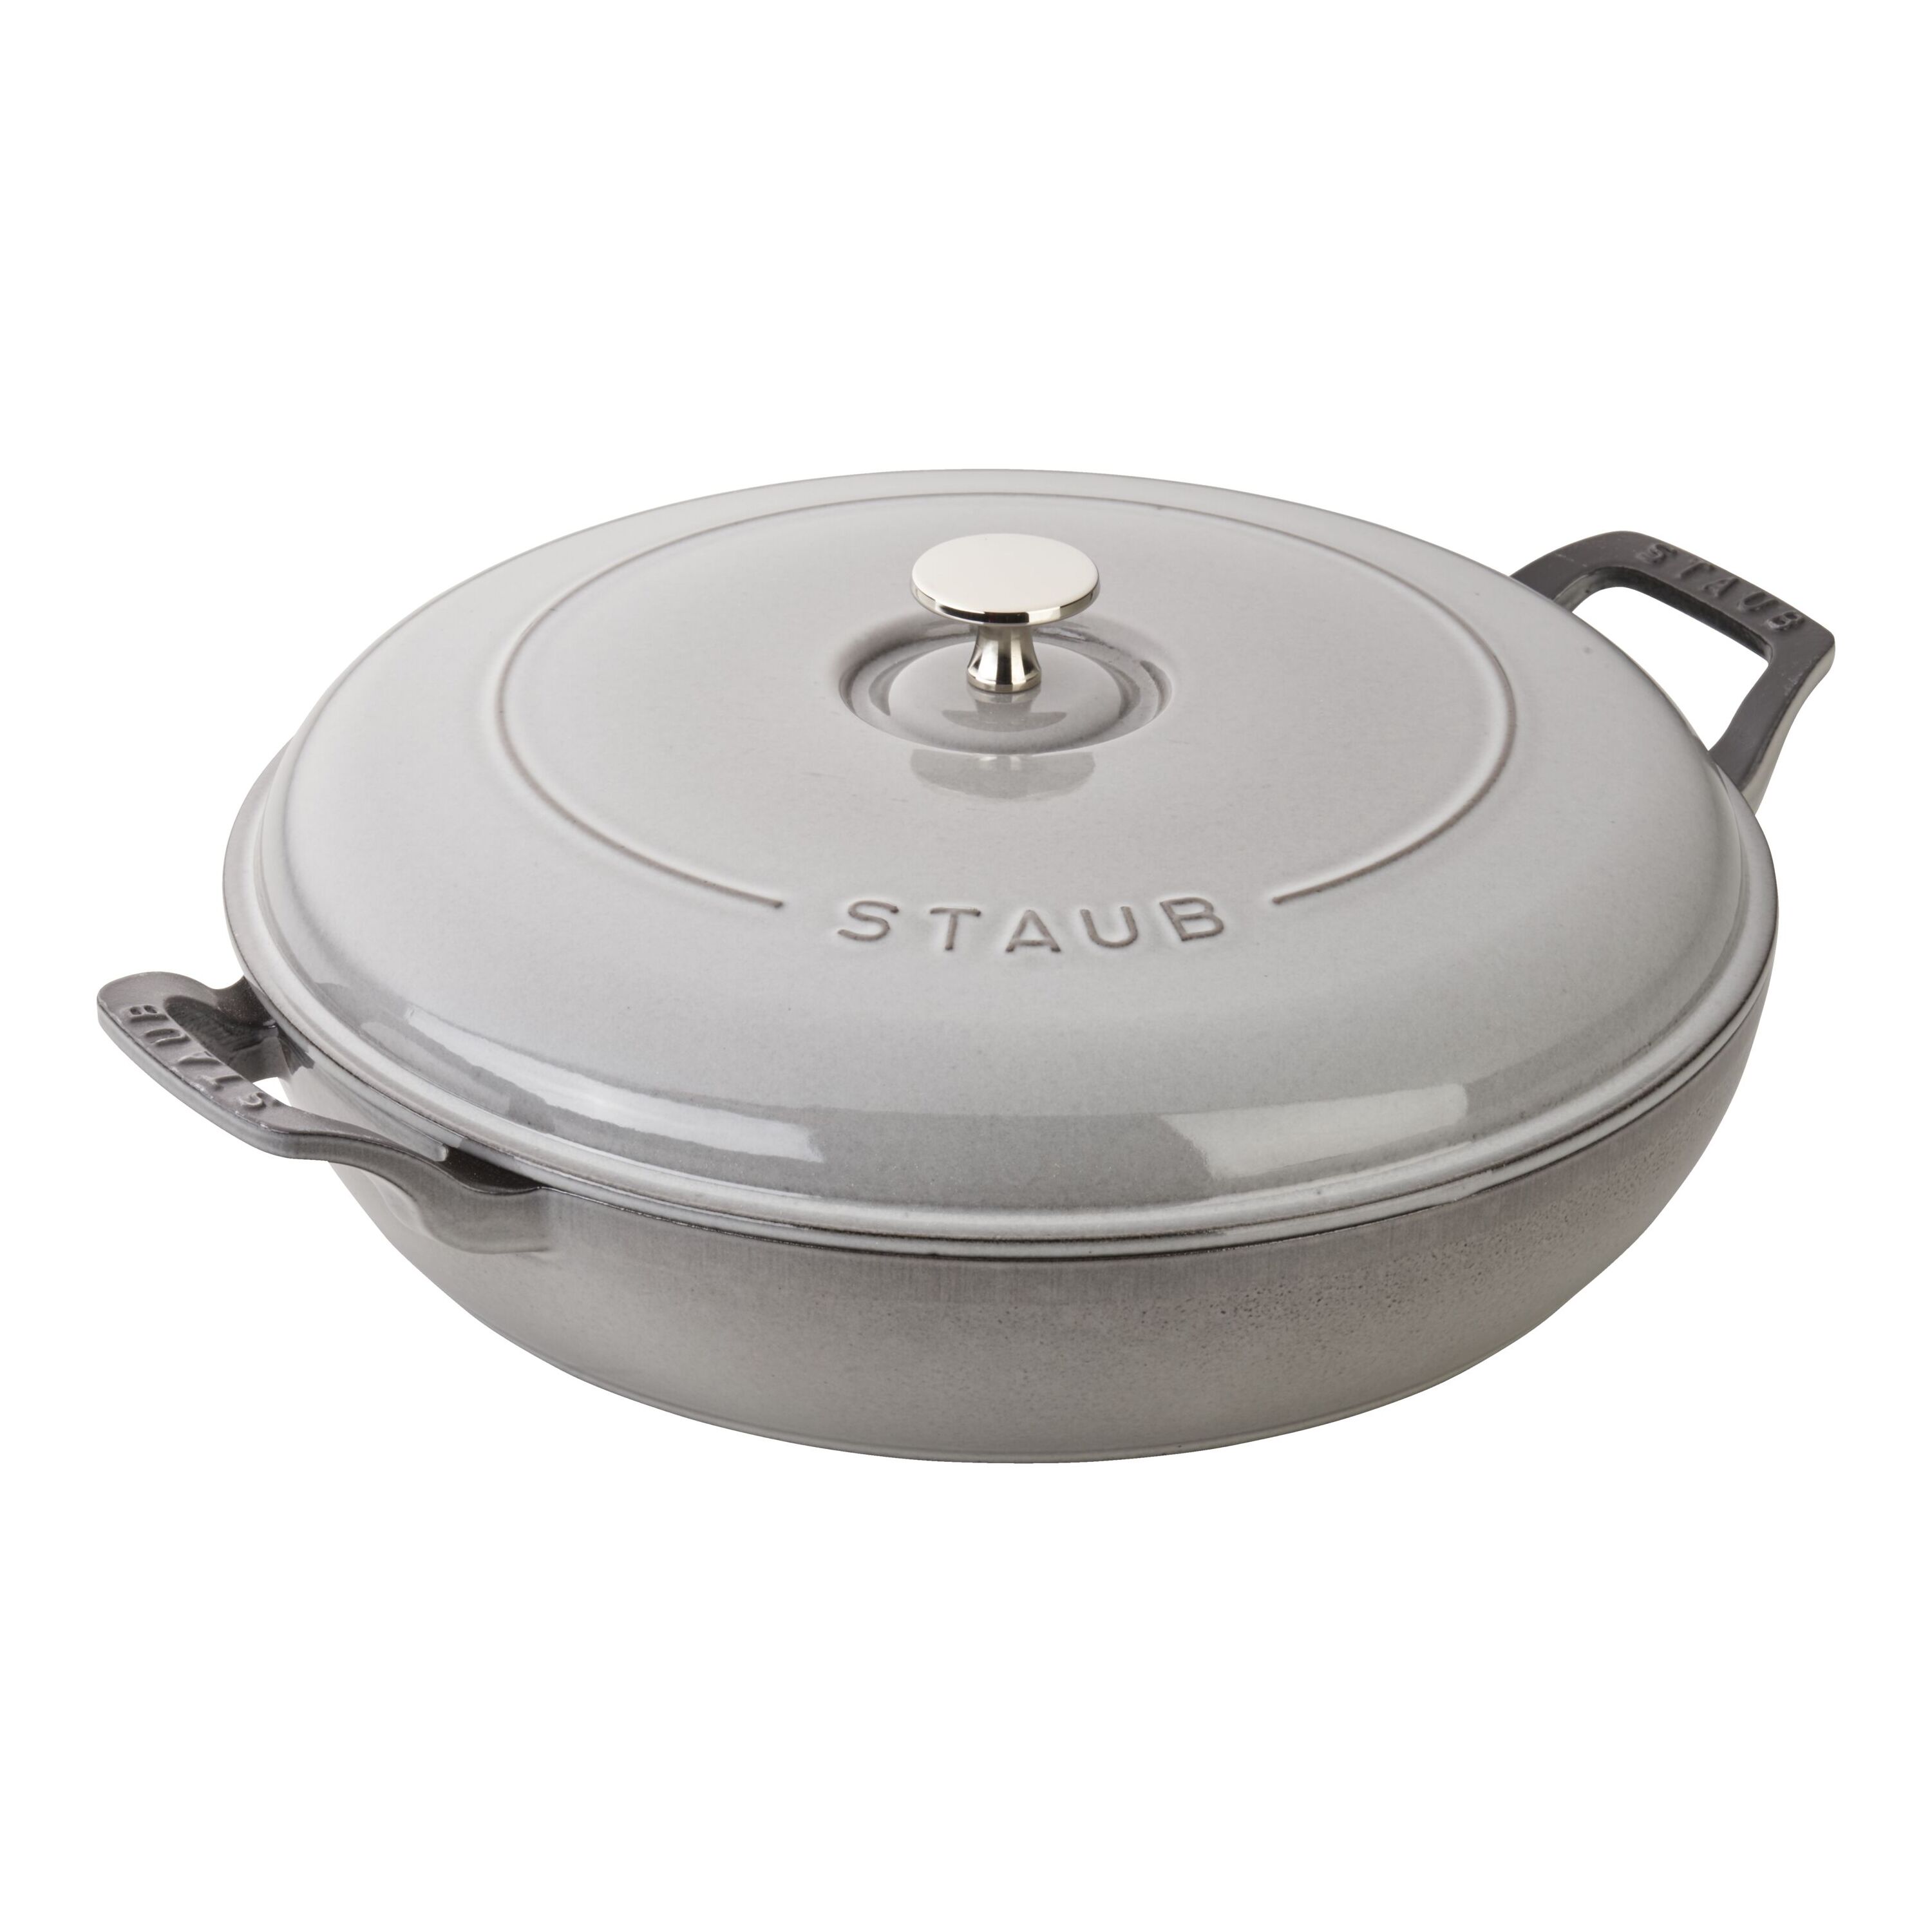 Stackable Dutch Oven, Braiser, and Grill Pan with Lid - Black, Staub